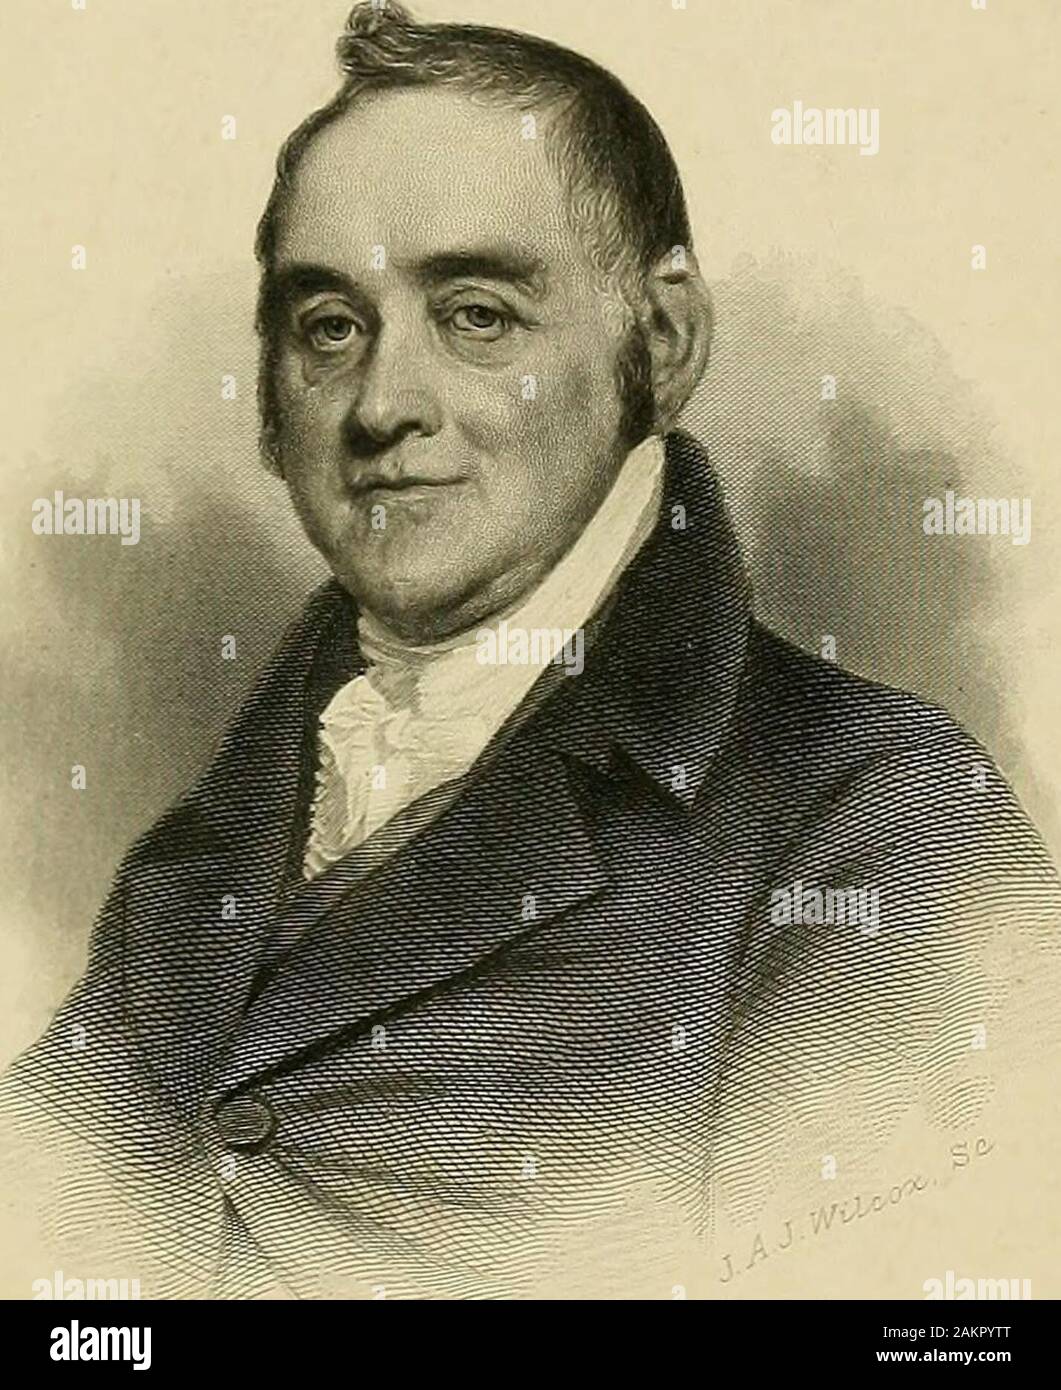 History of Essex County, Massachusetts : with biographical sketches of many of its pioneers and prominent men . 832, after referring to his remarkable men-tal powers, says that when their influence is united,as was his, with high moral powers, and exertedduring a long life on the side of virtue, and in pro-moting the best interests of society, it is enduring,and serves to give a character to the age in whichthey live. Mr. Thorndike was married three times. His firstwife was Mercy, daughter of Osmyn Trask, of Beverly.By her he had one son, who died in infancy, and adaughter, wife of Ebenezer Fr Stock Photo